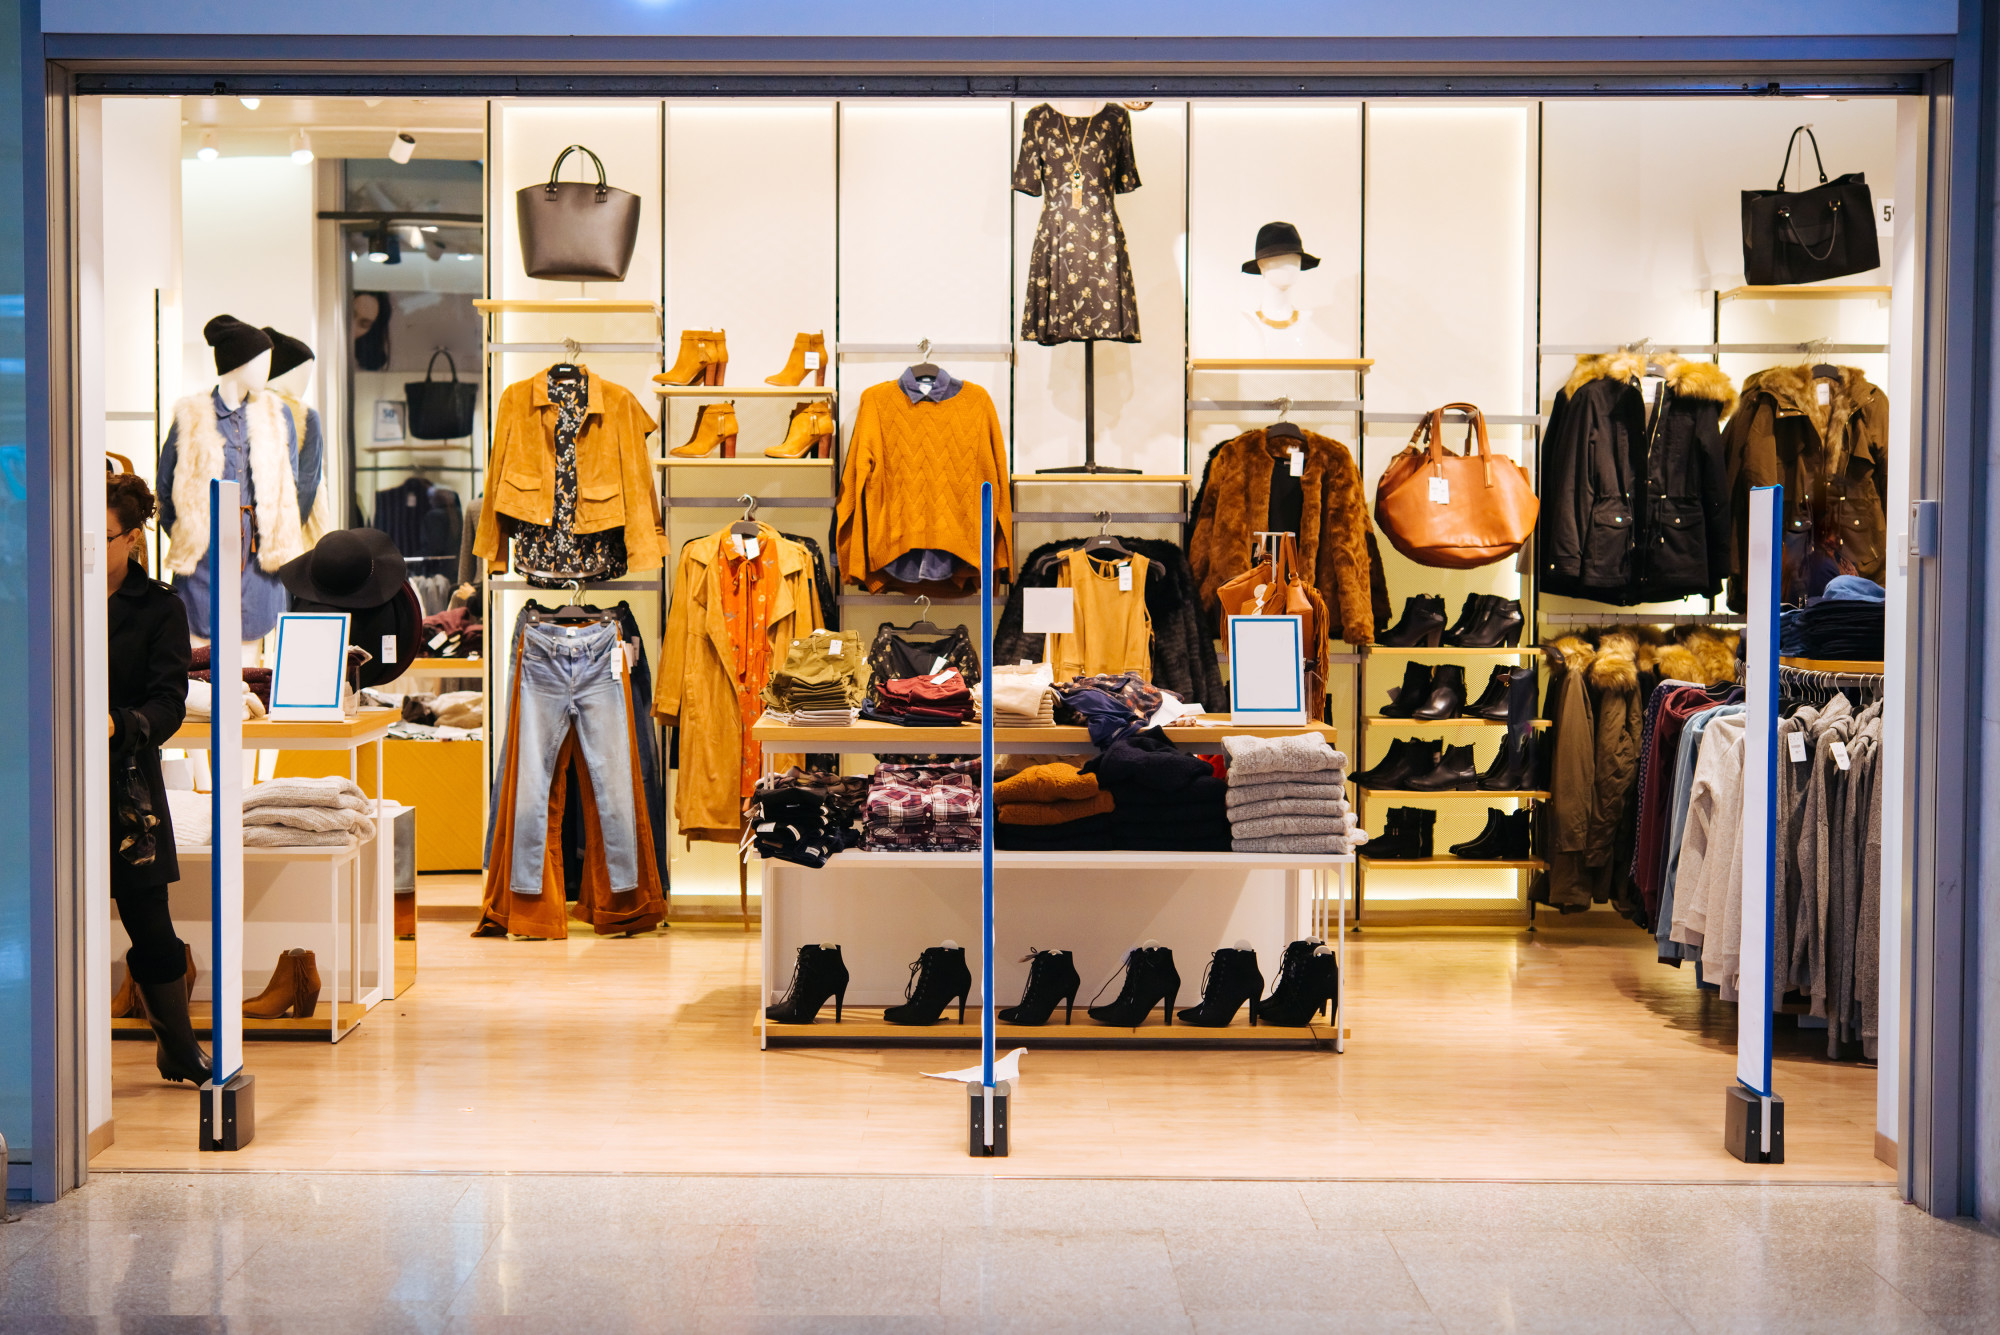 20 Retail Store Design Ideas To Attract More Customers - Spencil